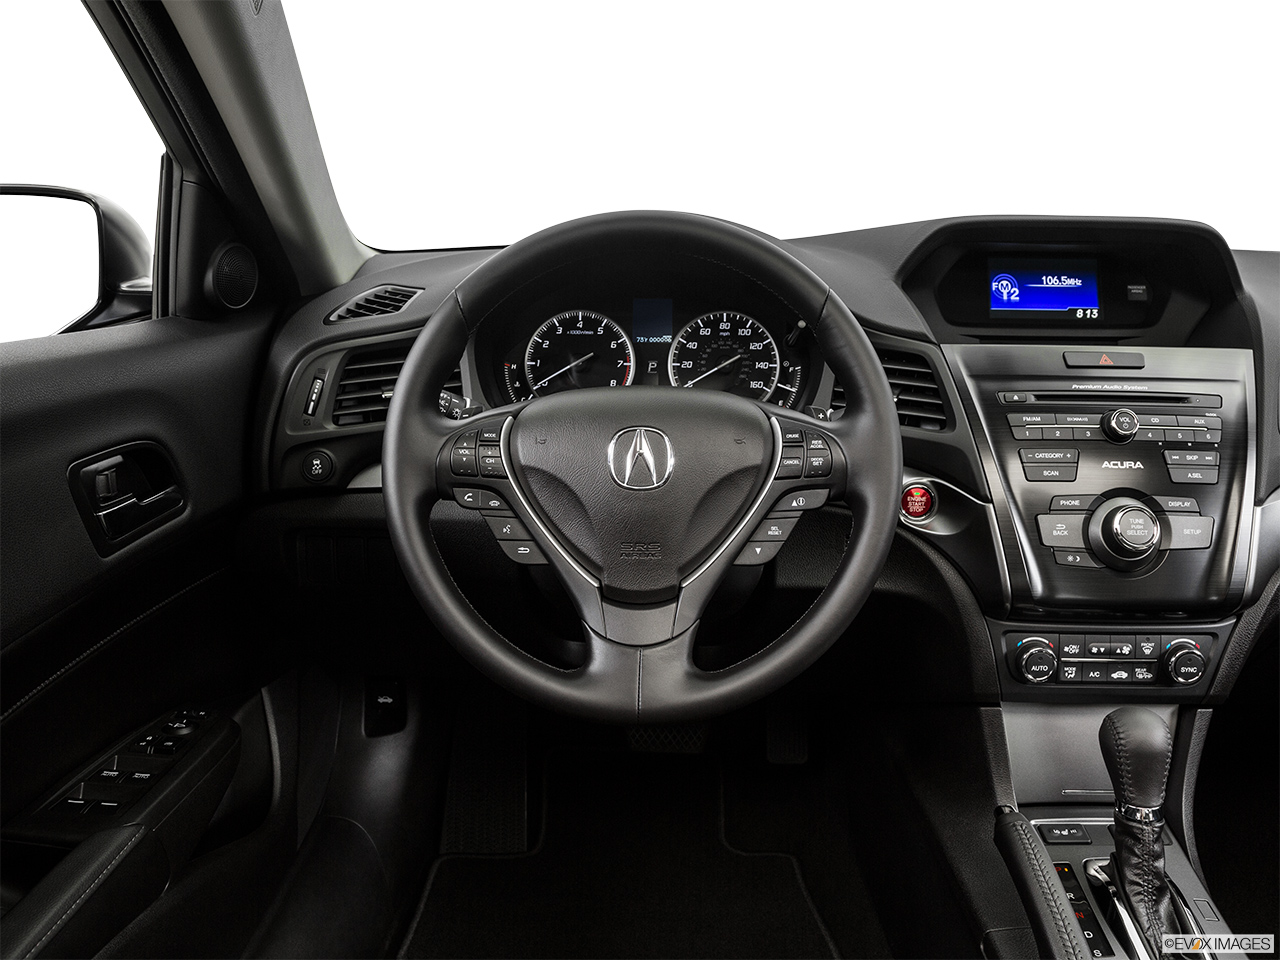 2015 Acura ILX 5-Speed Automatic Steering wheel/Center Console. 